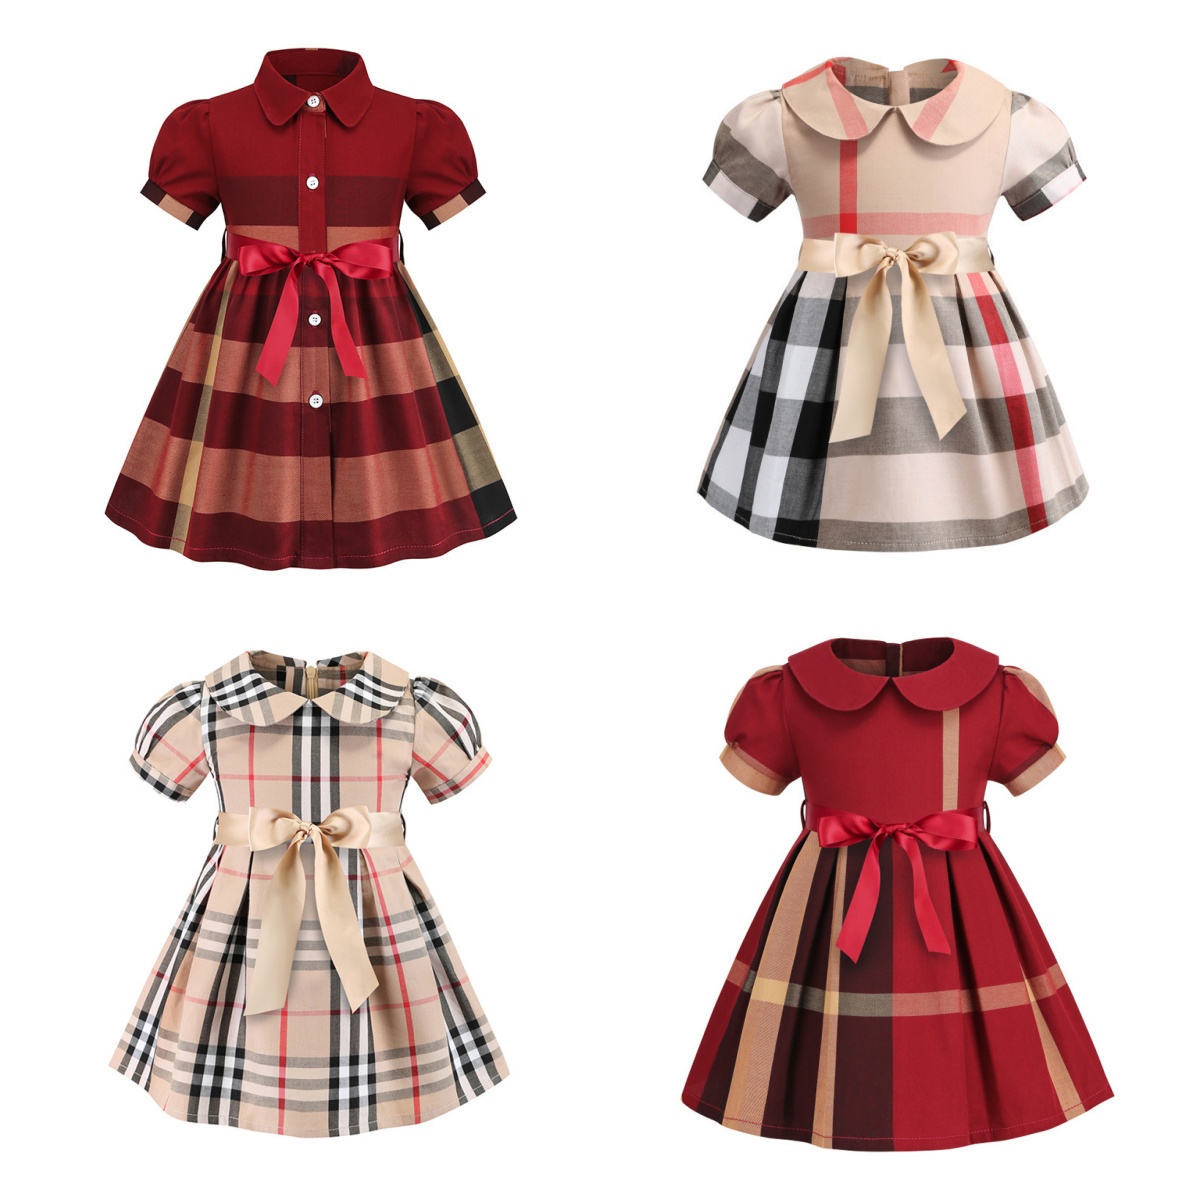 4 Style Summer Plaid Girls Dress Children Classic Fashion Party A-line Casual Dress Clothes 1-7T for kids Princess Birthday Holiday Dress